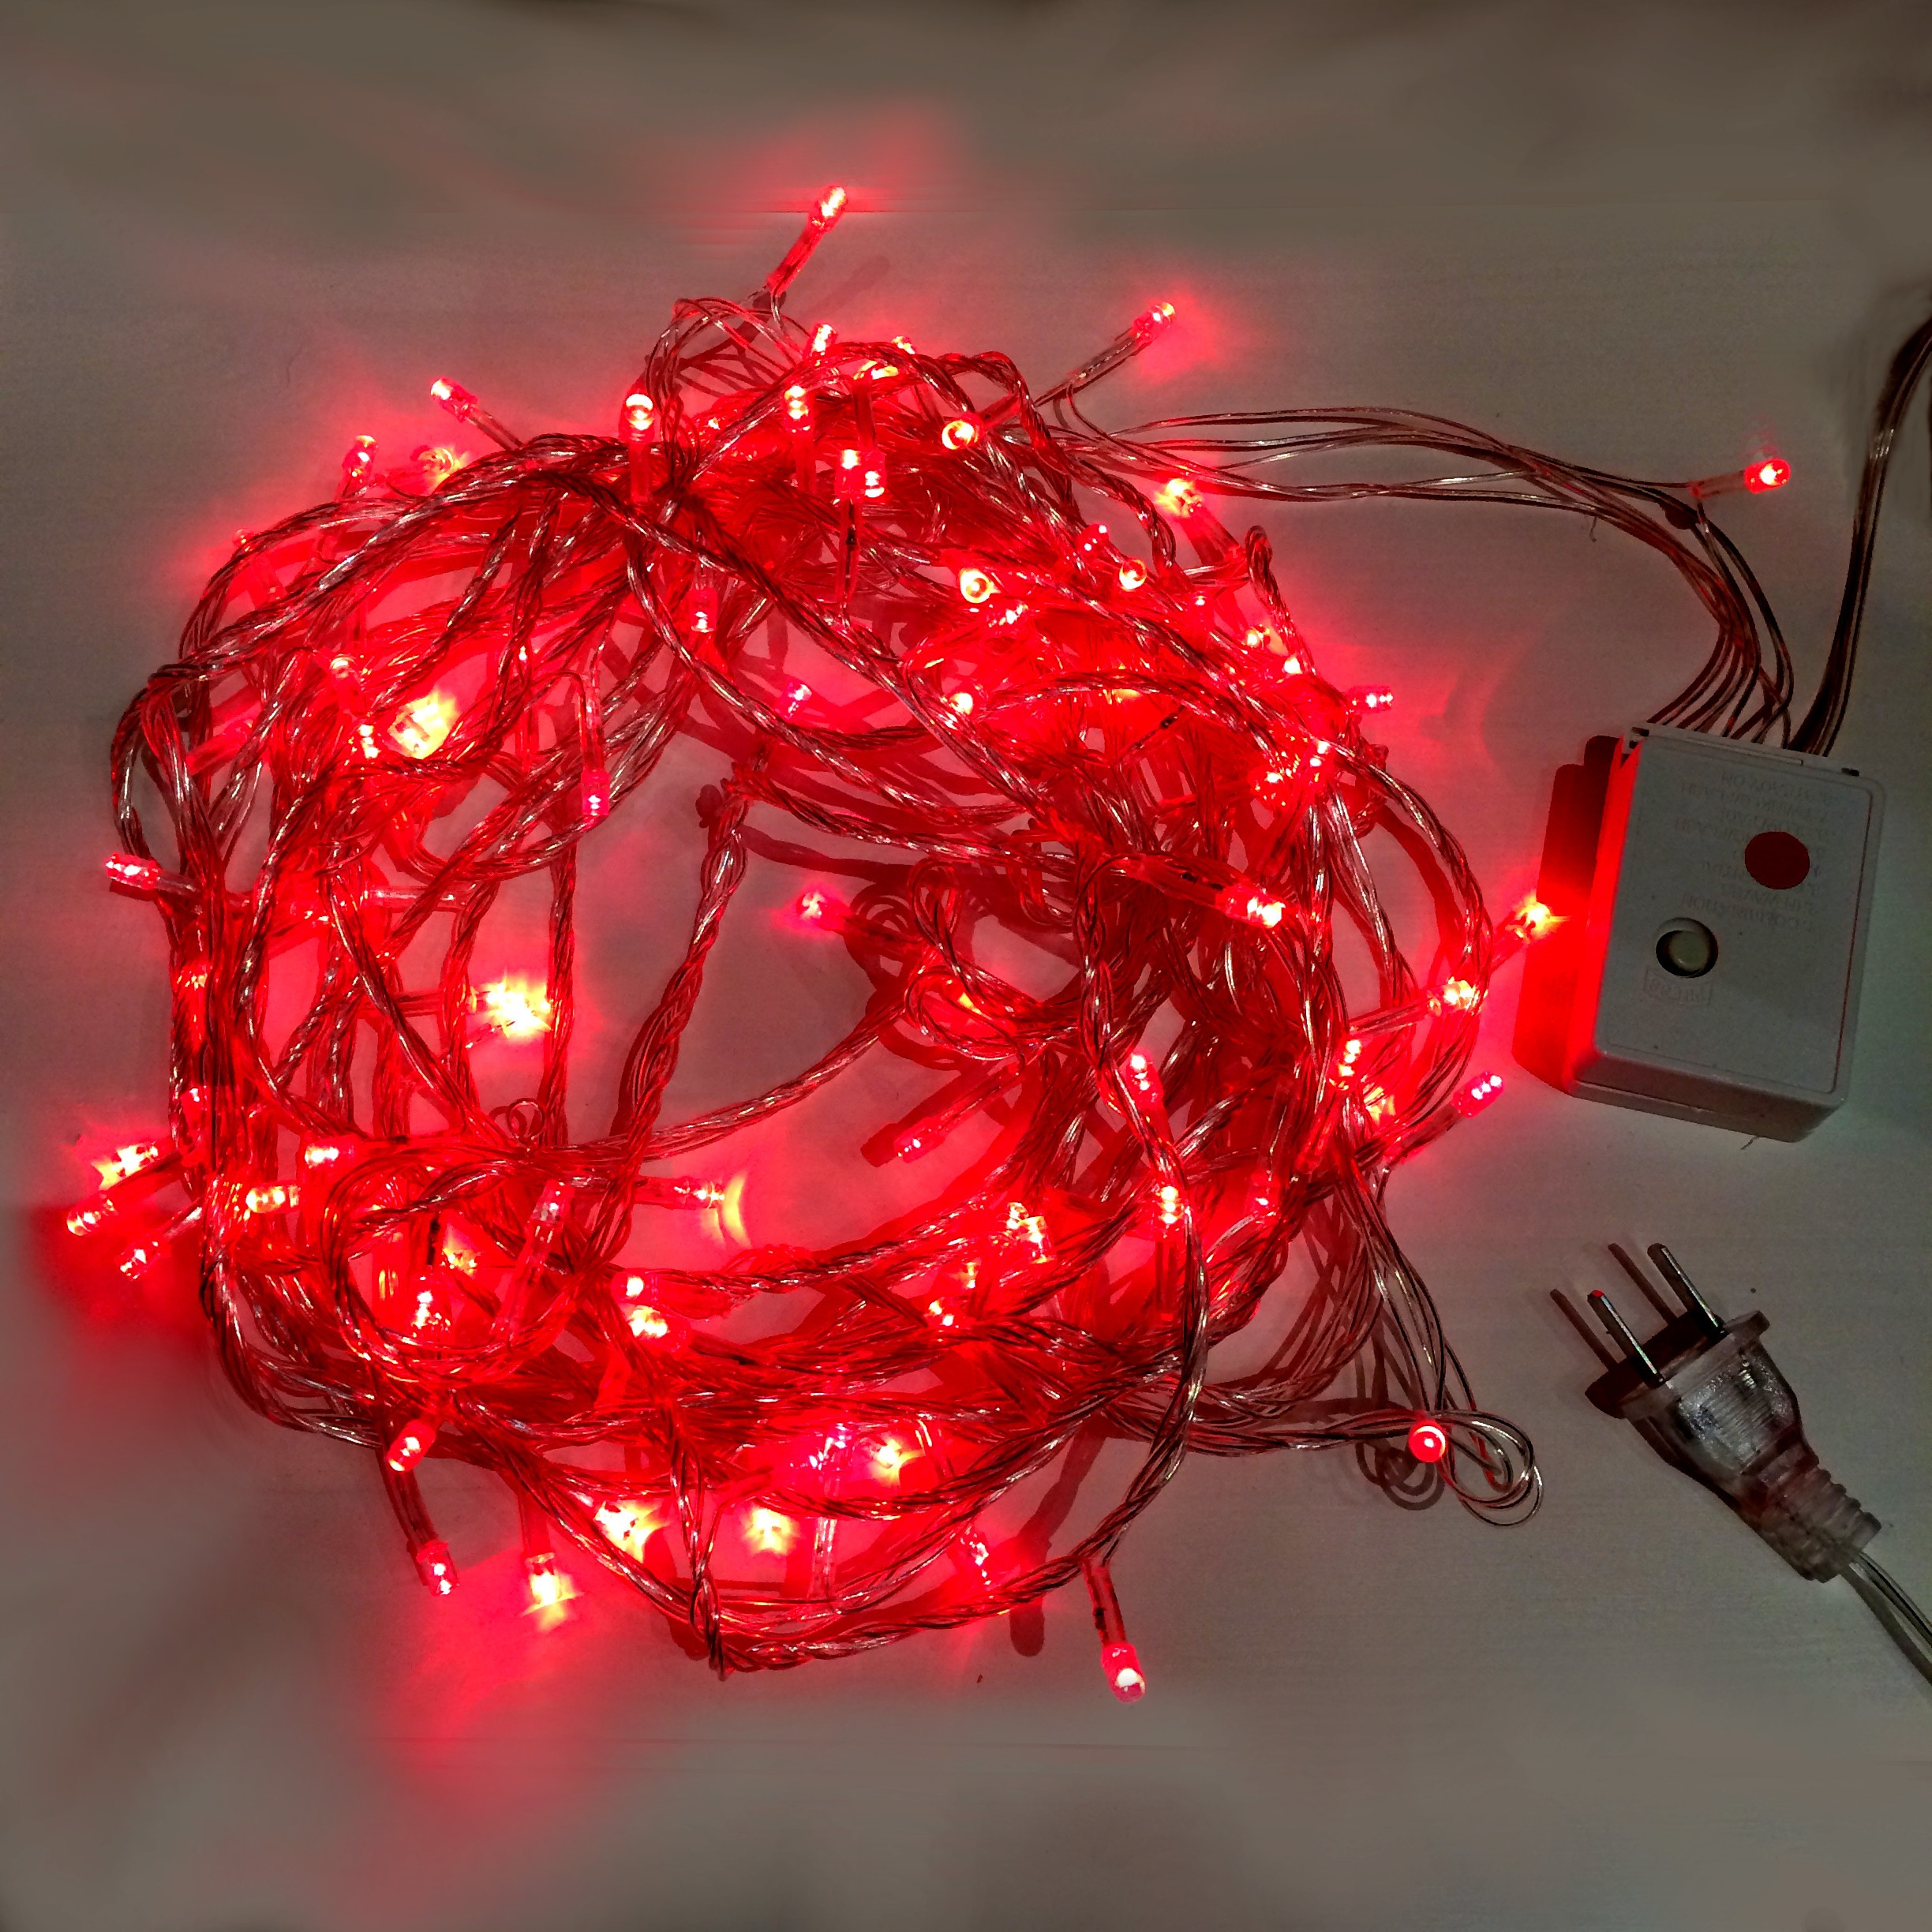 Details about   Christmas Lights 5M Led String Fairy Light 8 Modes Lights For Wedding and Party